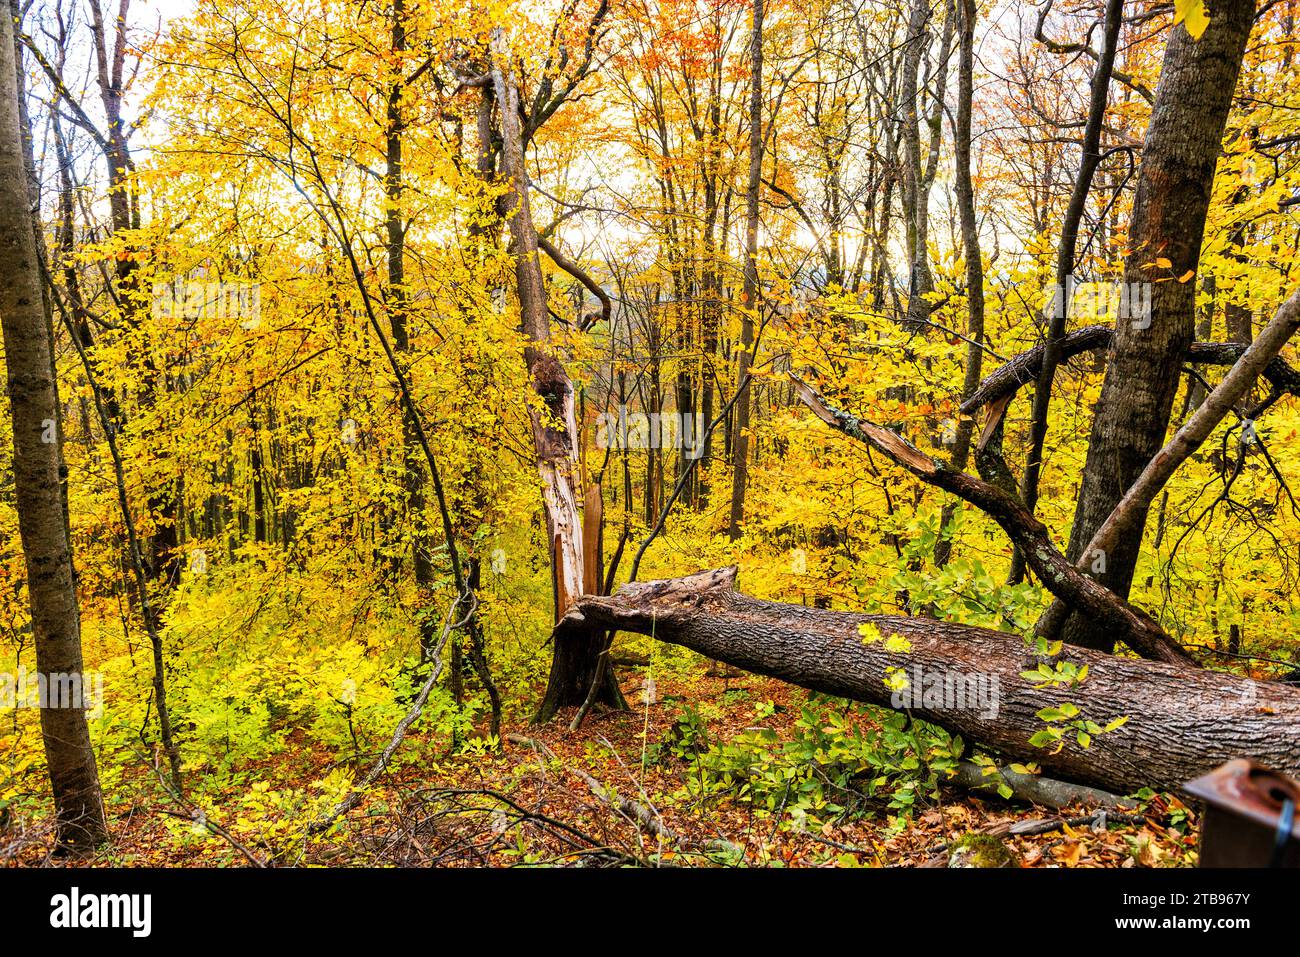 Autumn forest landscape with a split and fallen tree Stock Photo